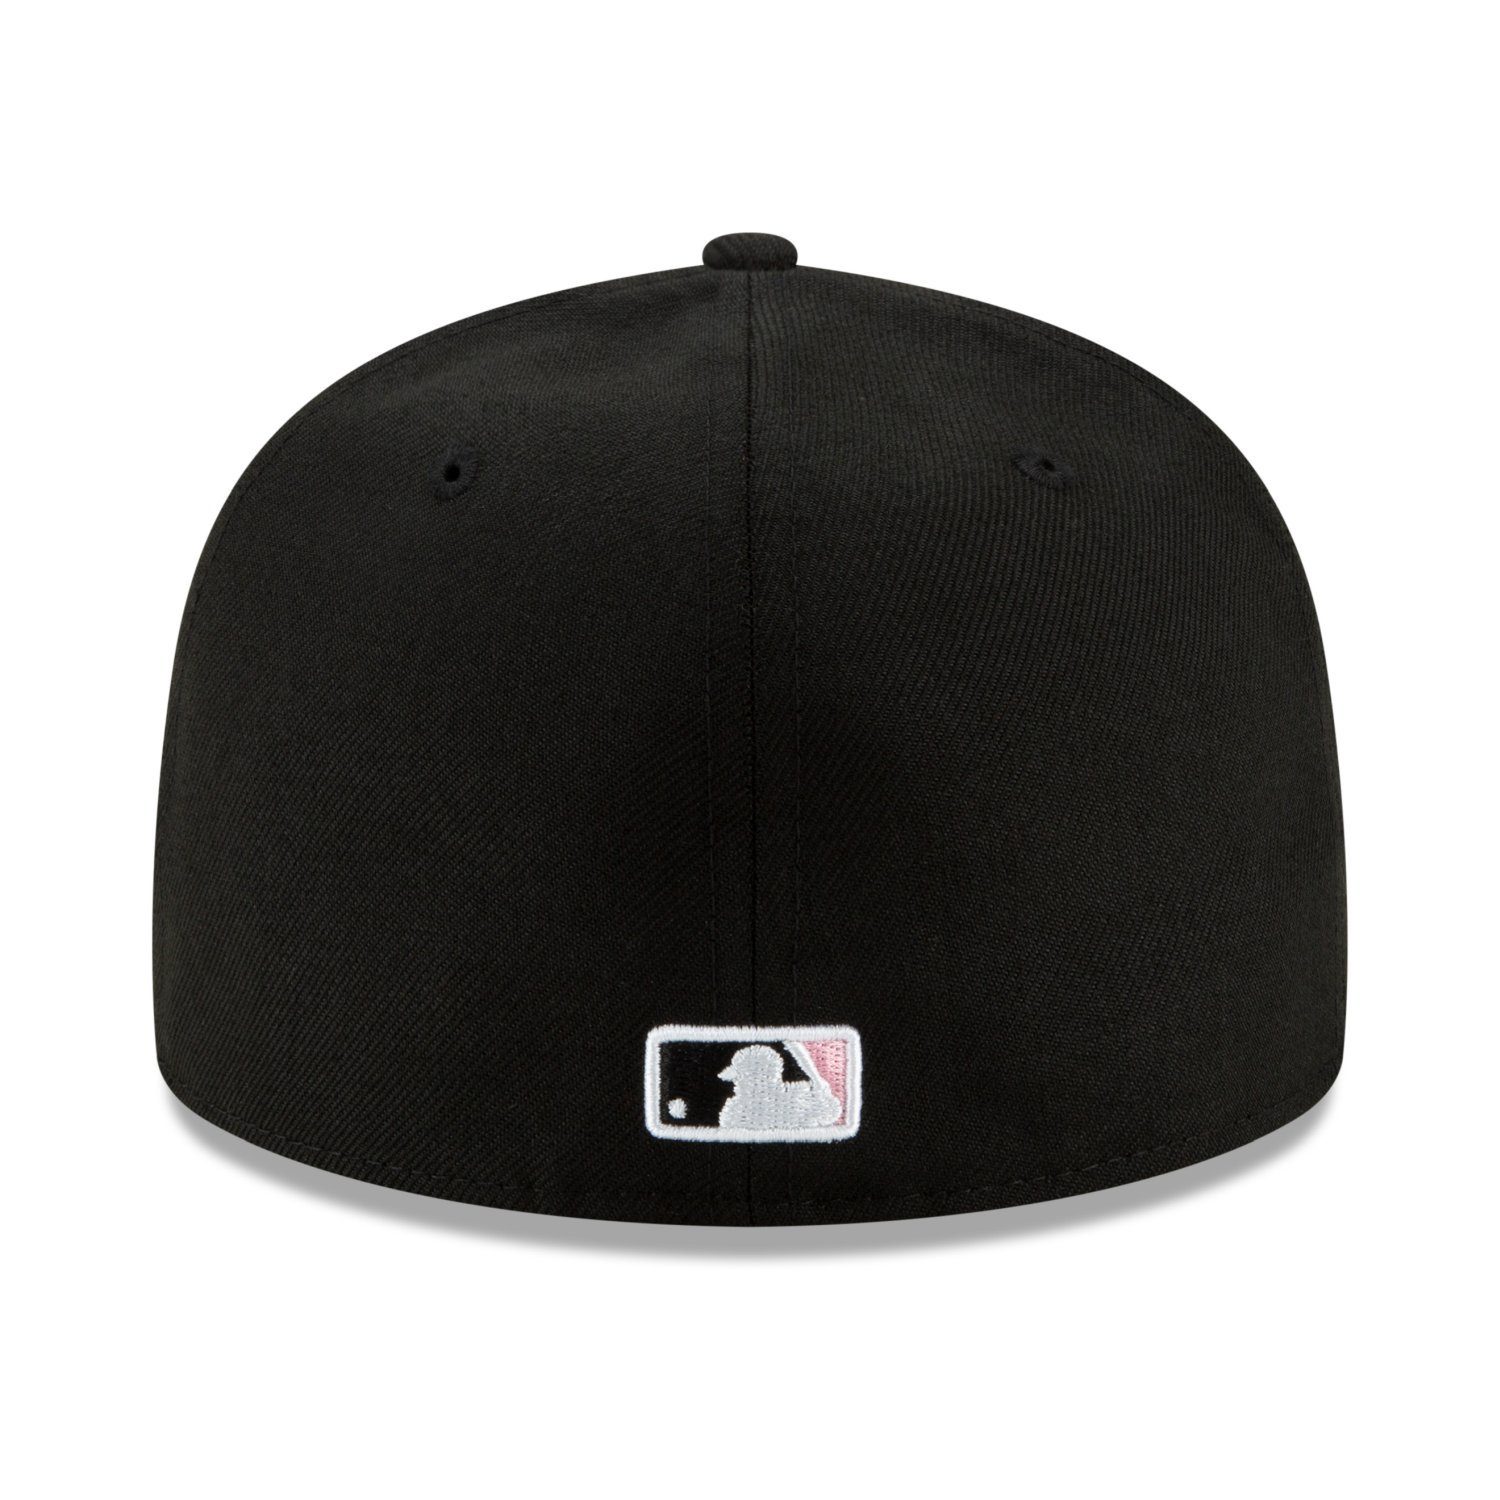 New Era Fitted Cap LIFESTYLE New York Yankees 59Fifty